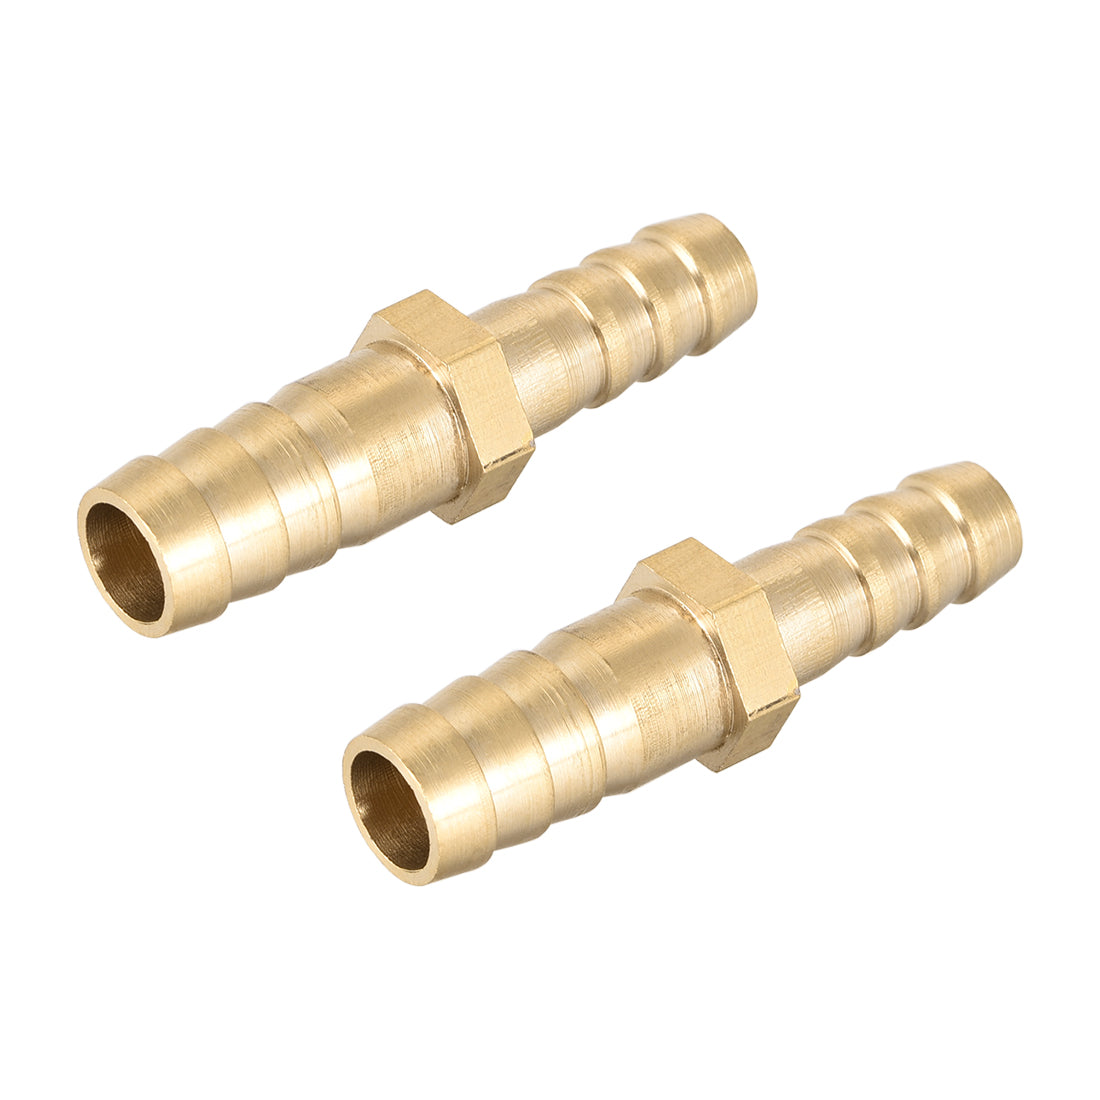 Uxcell Uxcell Straight Brass Barb Fitting Reducer, Fit Hose ID 12mm to 10mm 2pcs